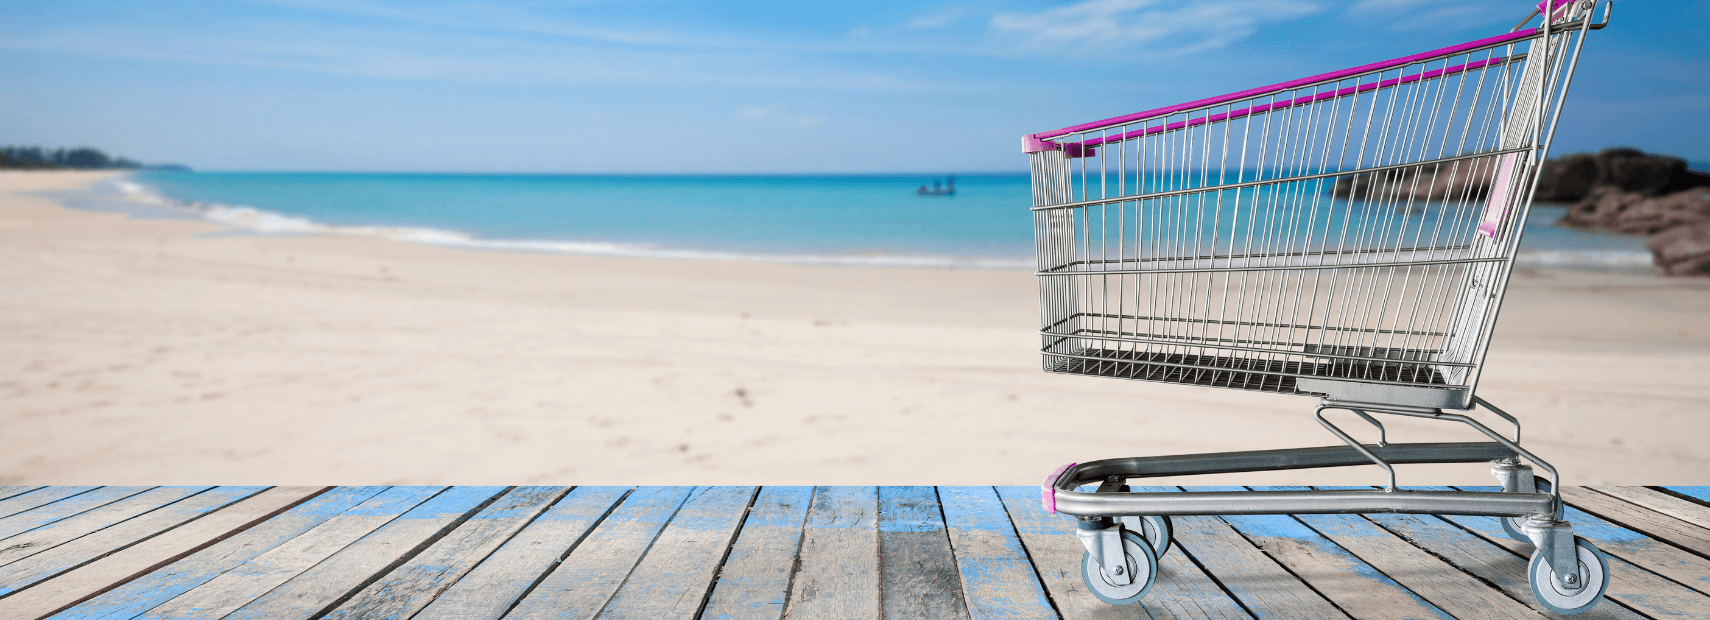 Sizzling Summer Product Ideas for Your POD Store